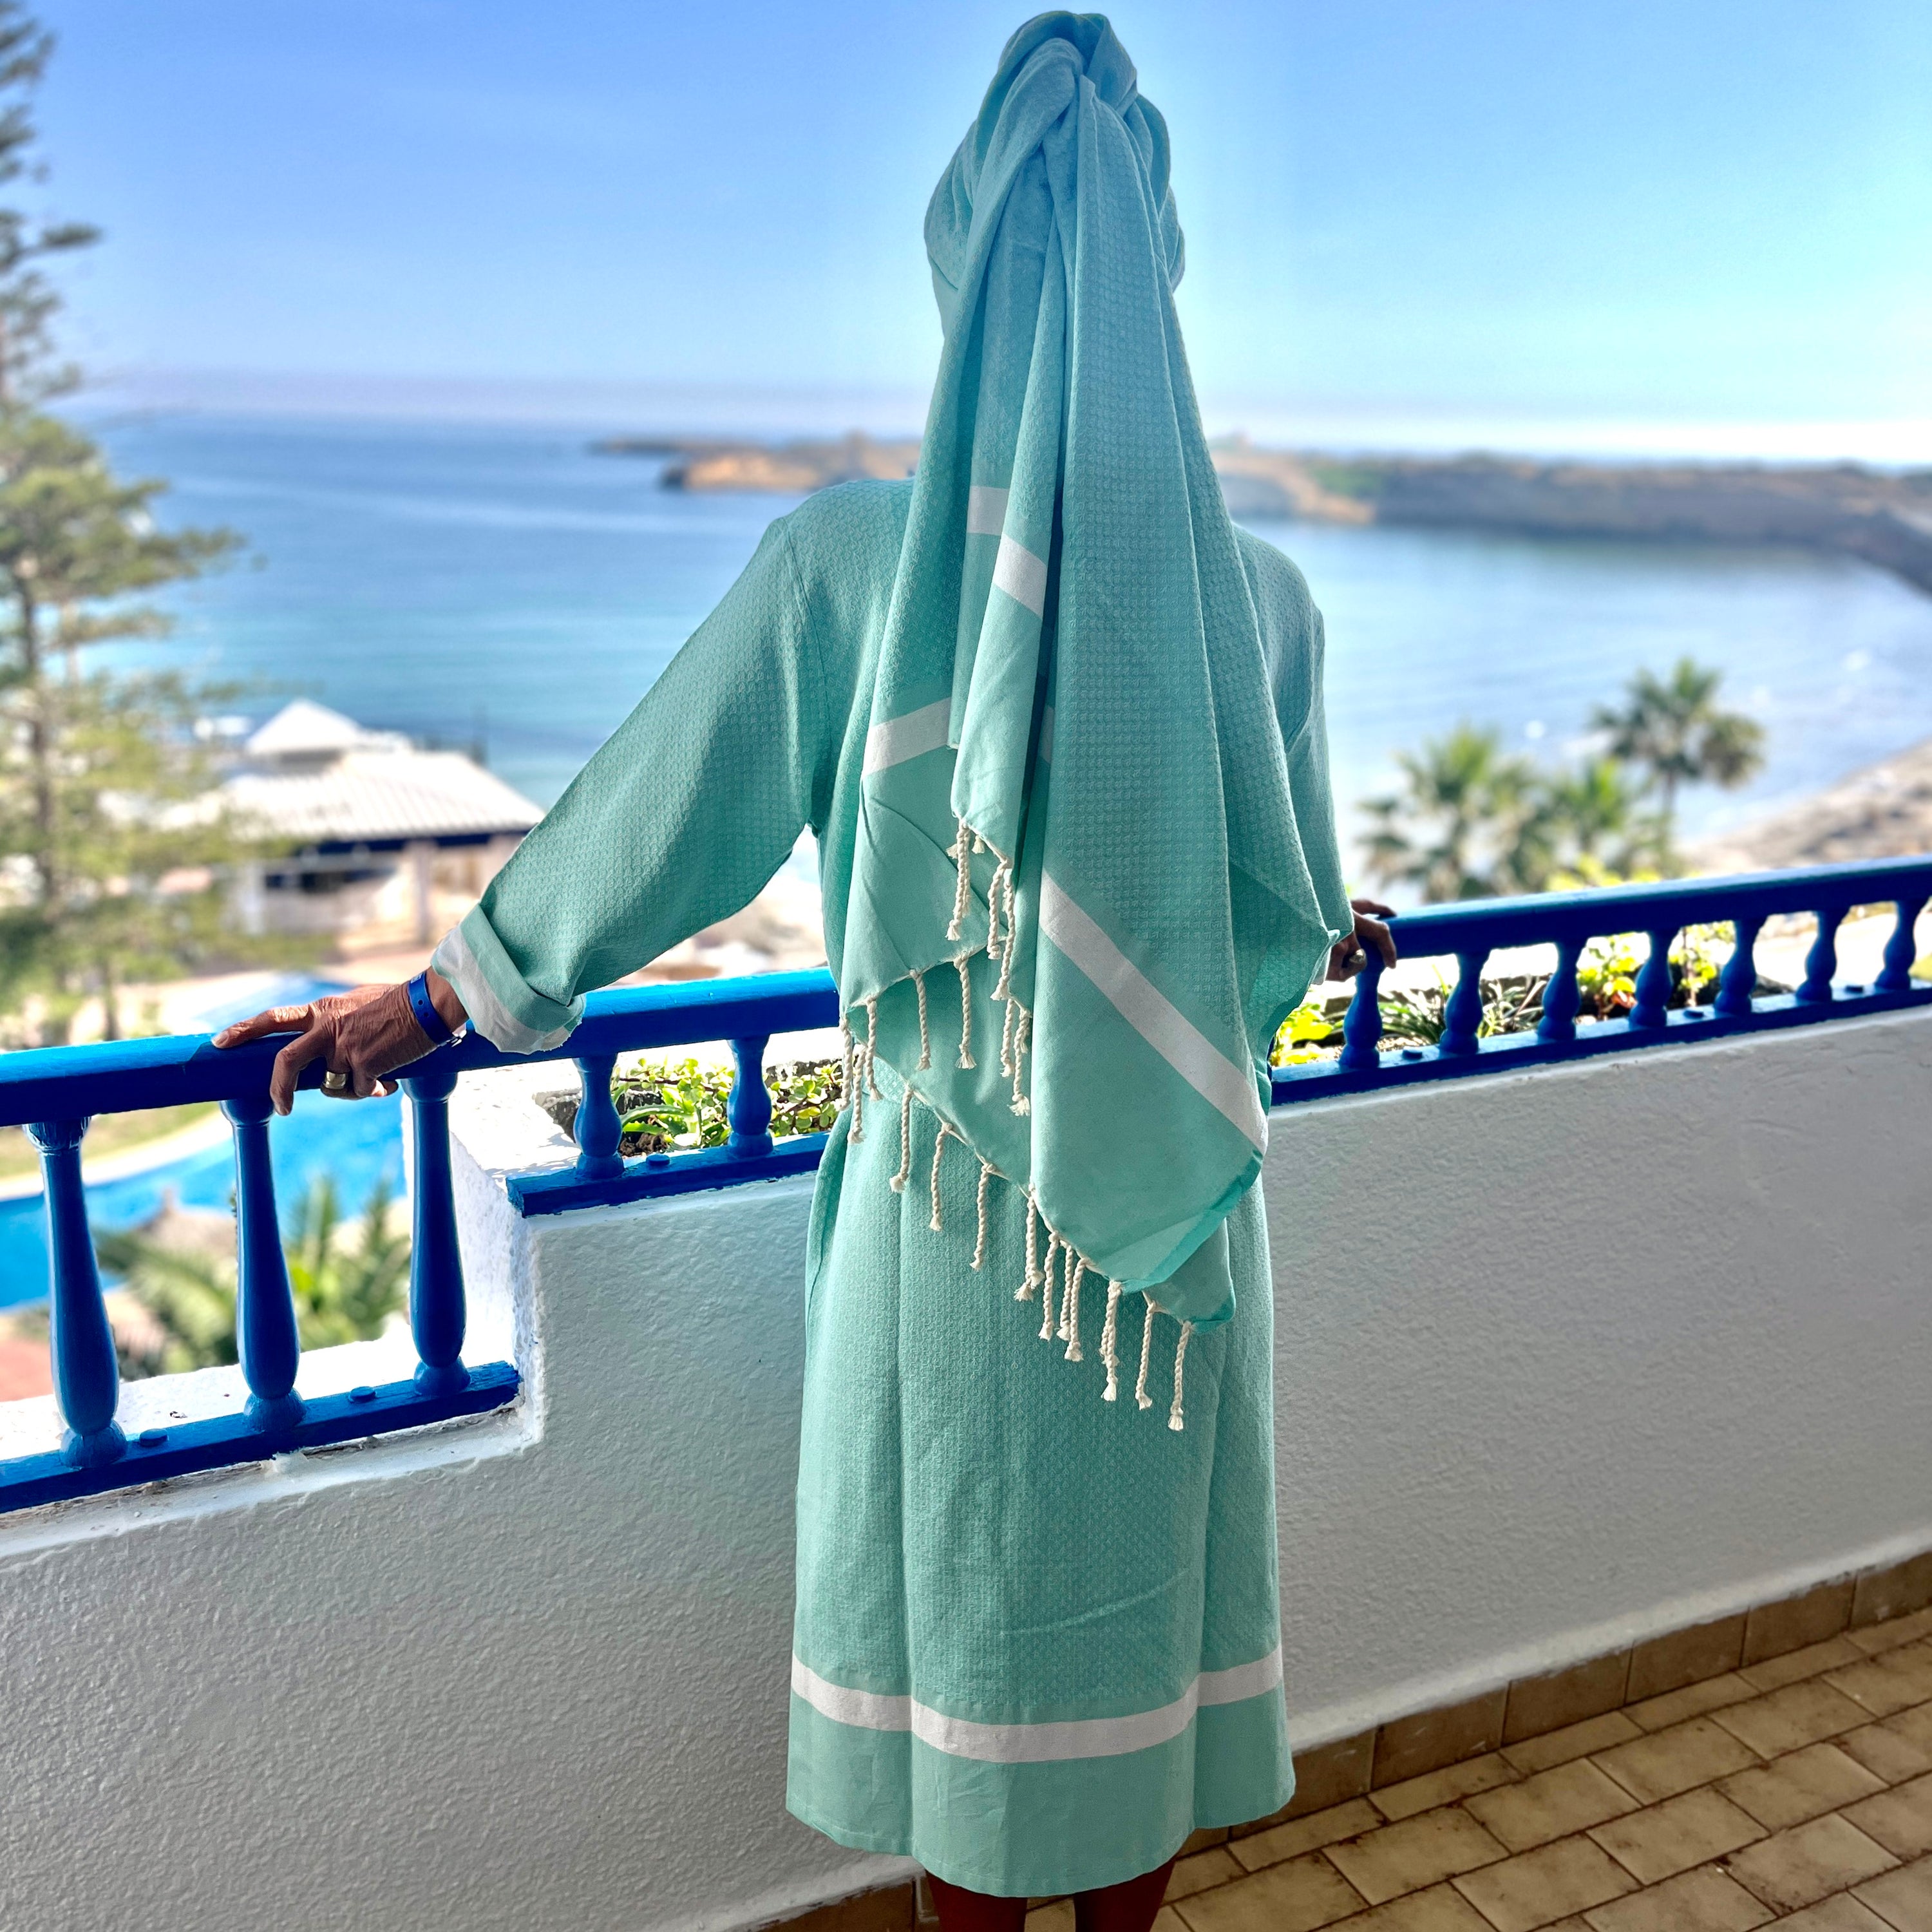 Super Absorbent and Soft. The robes are made from our Fouta towels. Light Weight, the towels are perfect to dry Hair too.